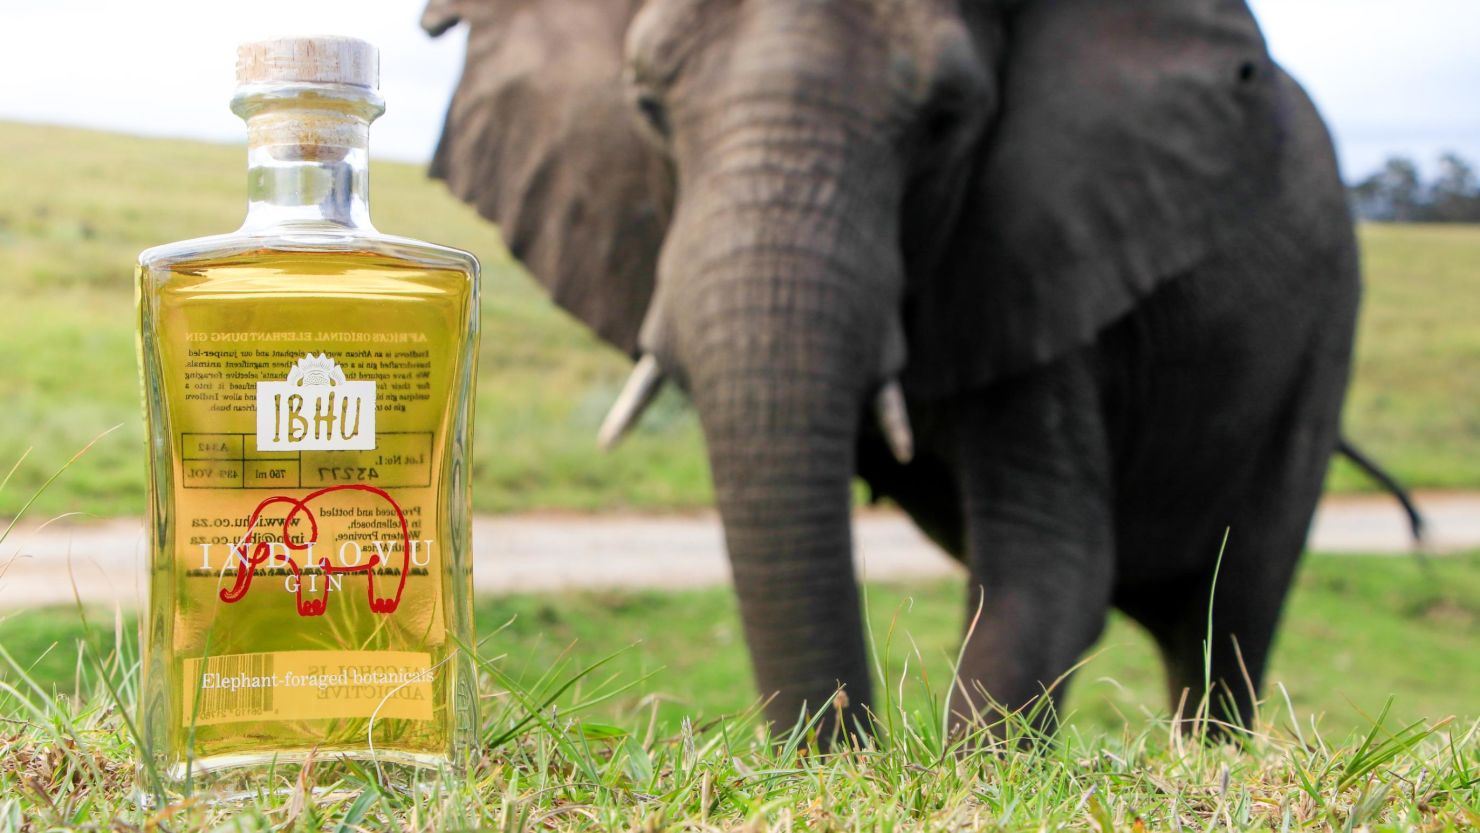 Indlovu Gin is infused with botanicals sourced from elephant dung.